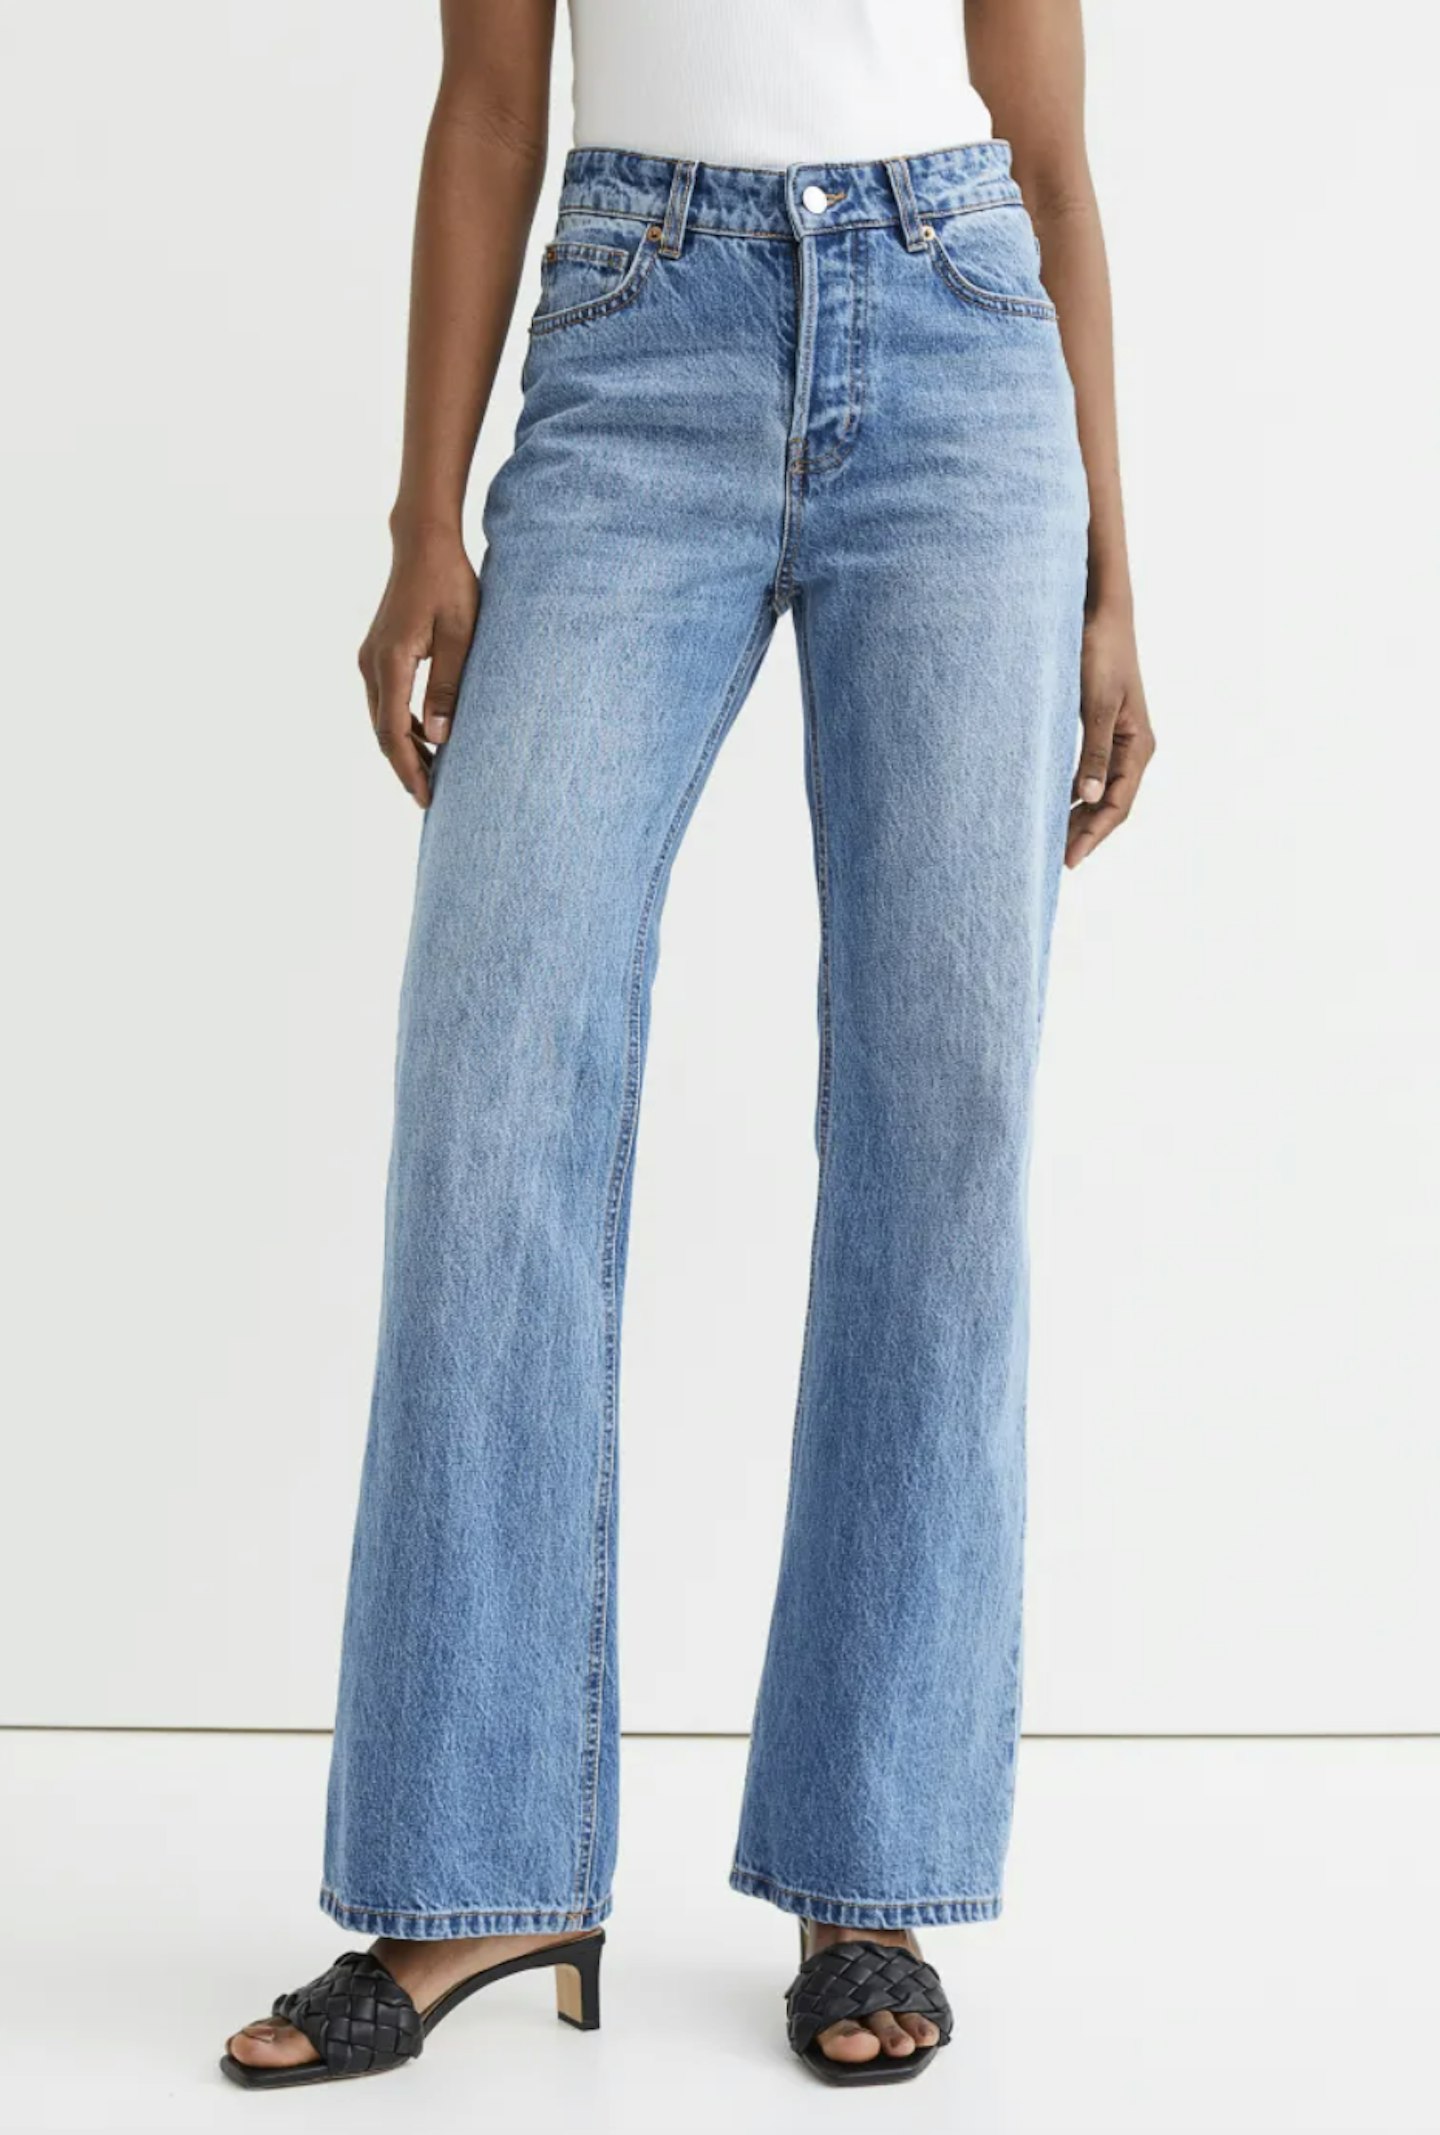 Best Low Rise Jeans 2022: The Best Affordable Picks From High-Street